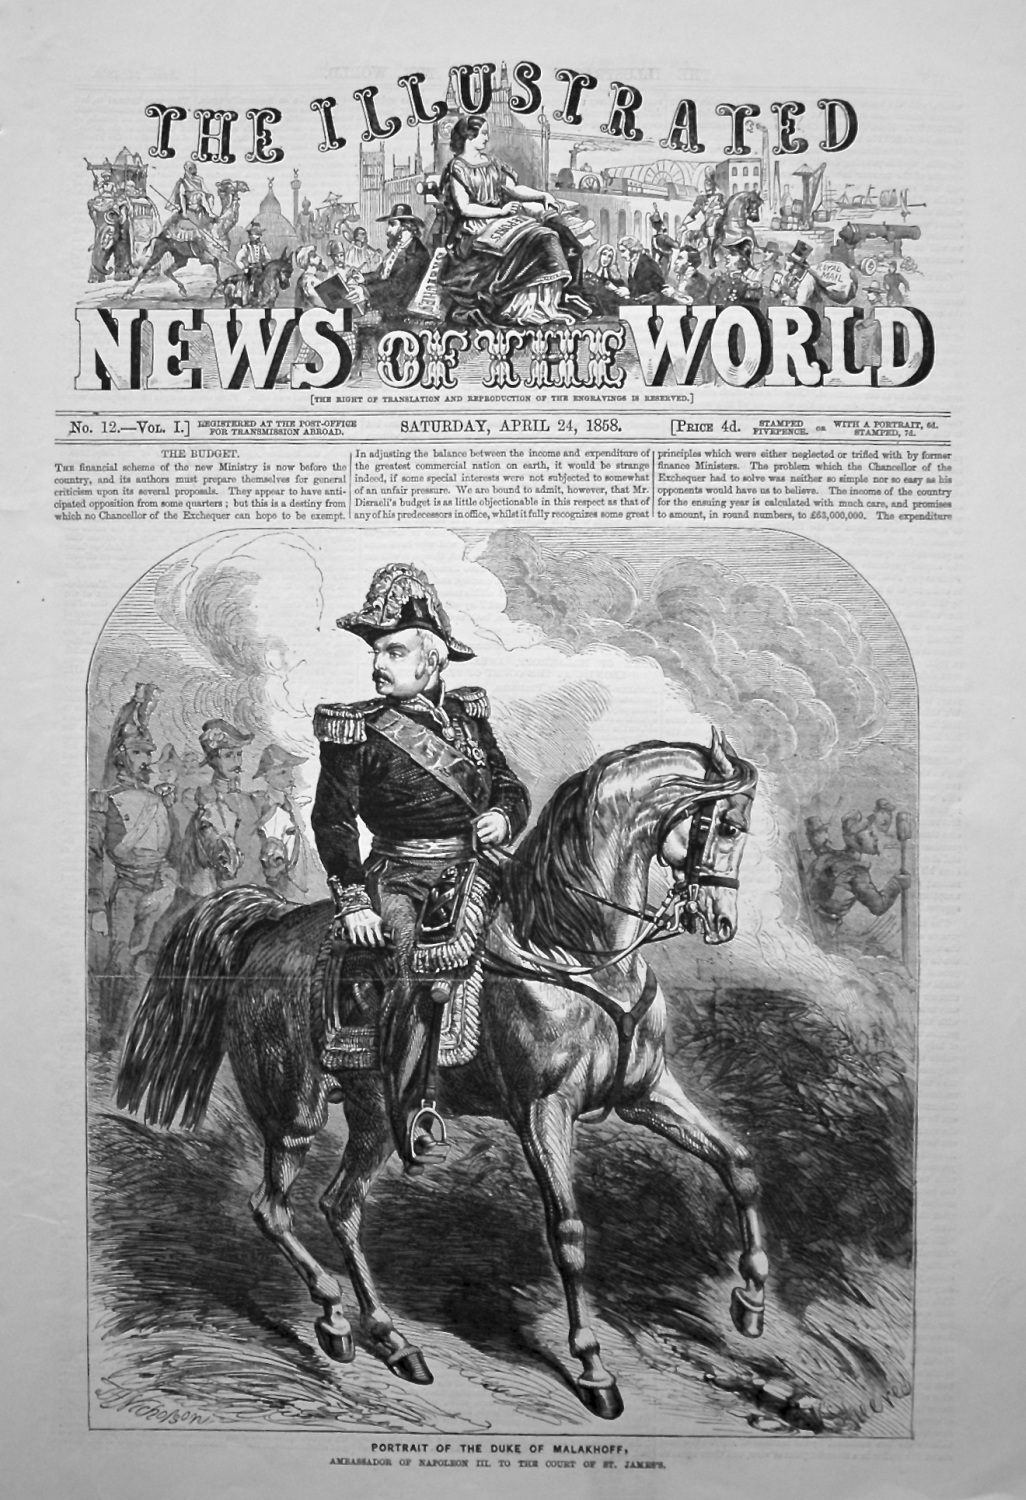 The Illustrated News of the World, April 24th, 1858.